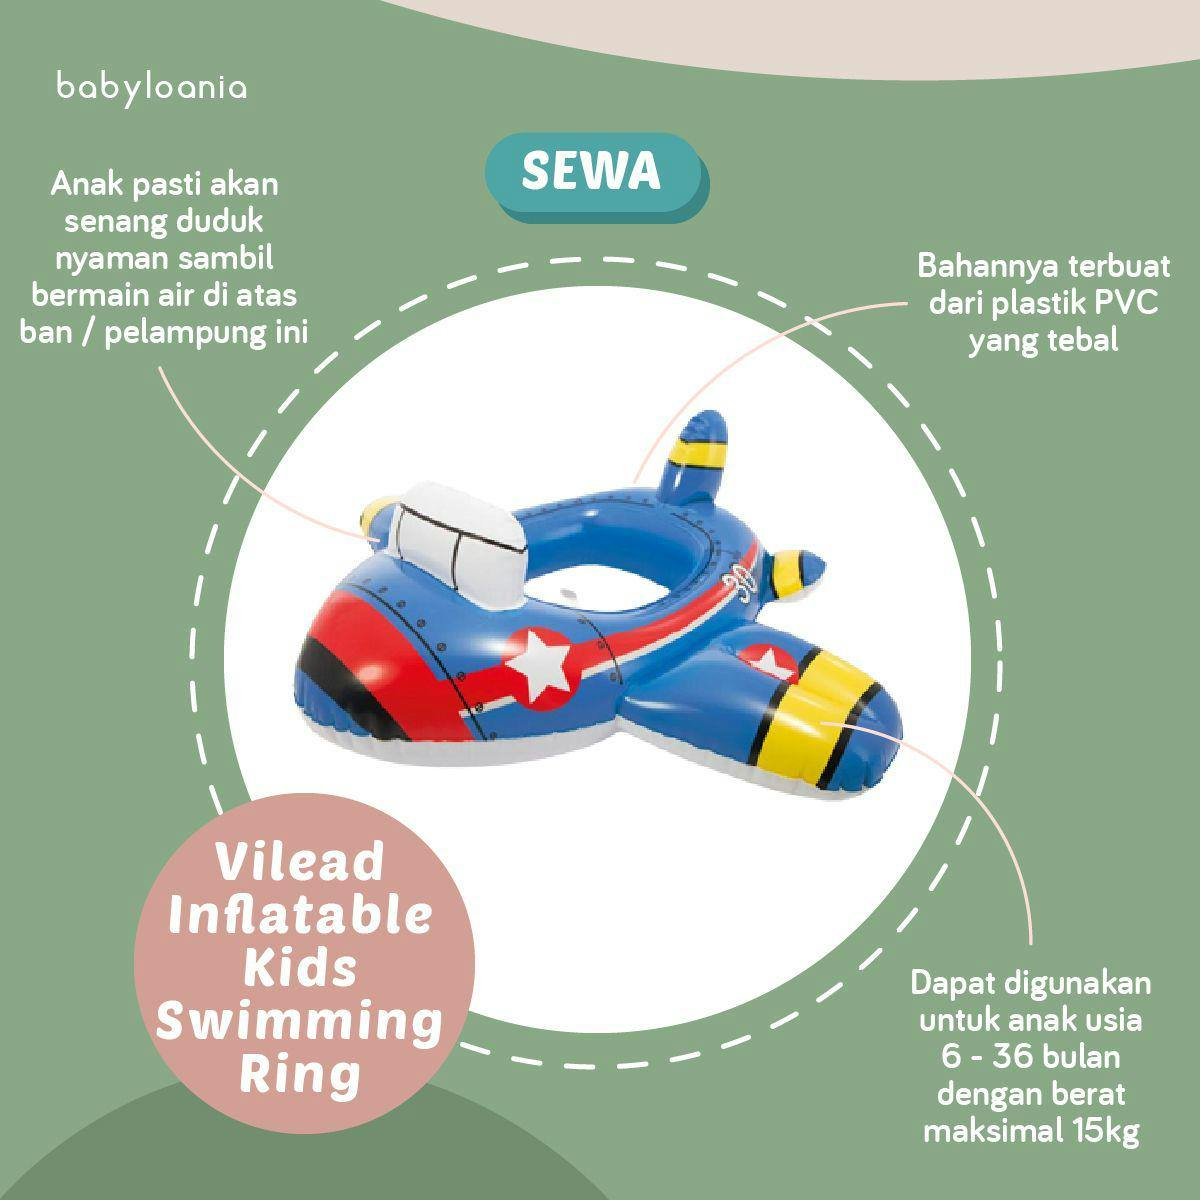 Vilead Inflatable Kids Swimming Ring